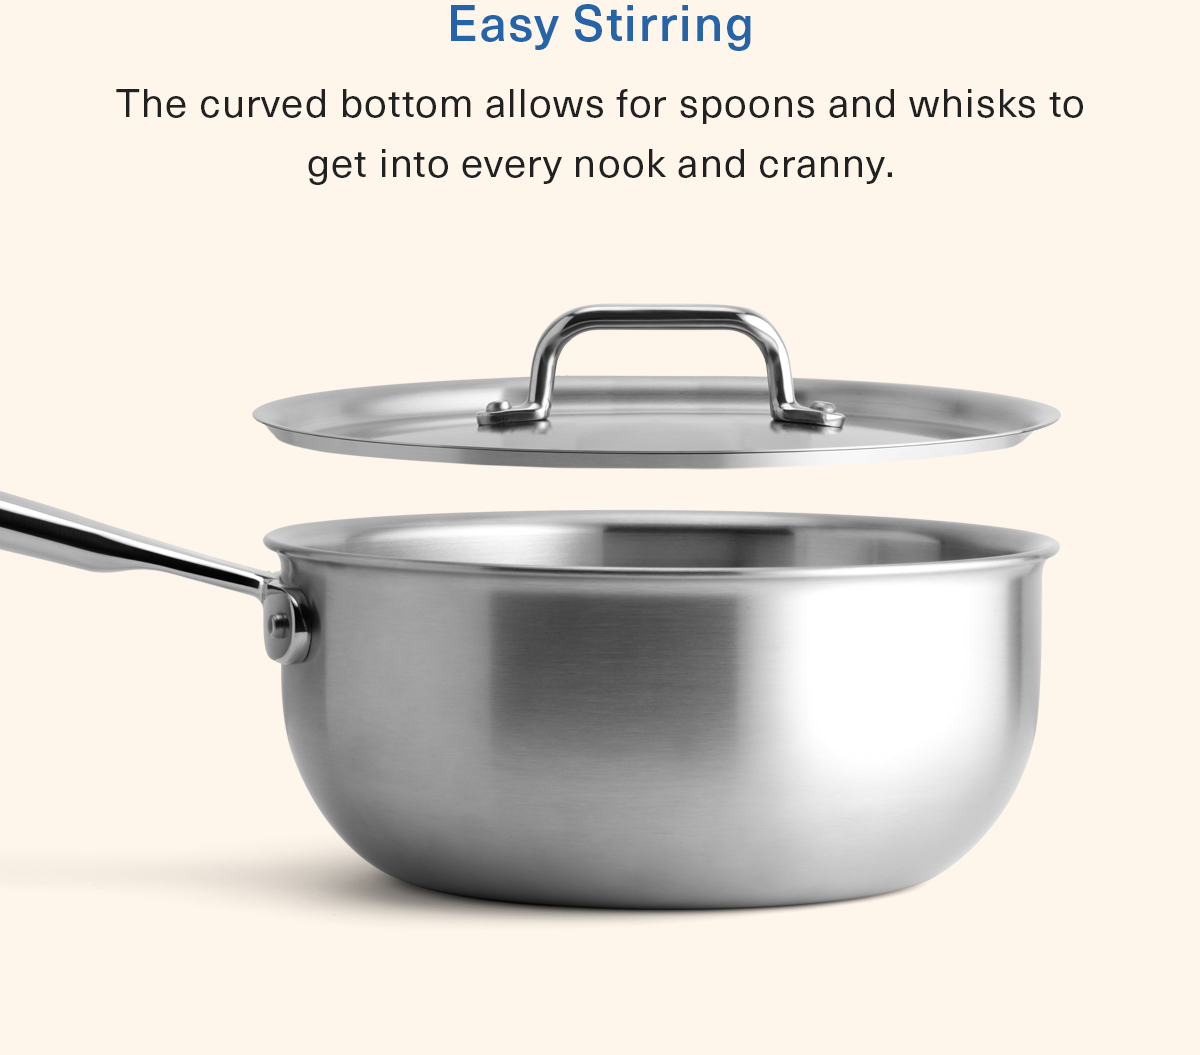 Misen: Save 40% on our bestselling Stainless Steel Saucier